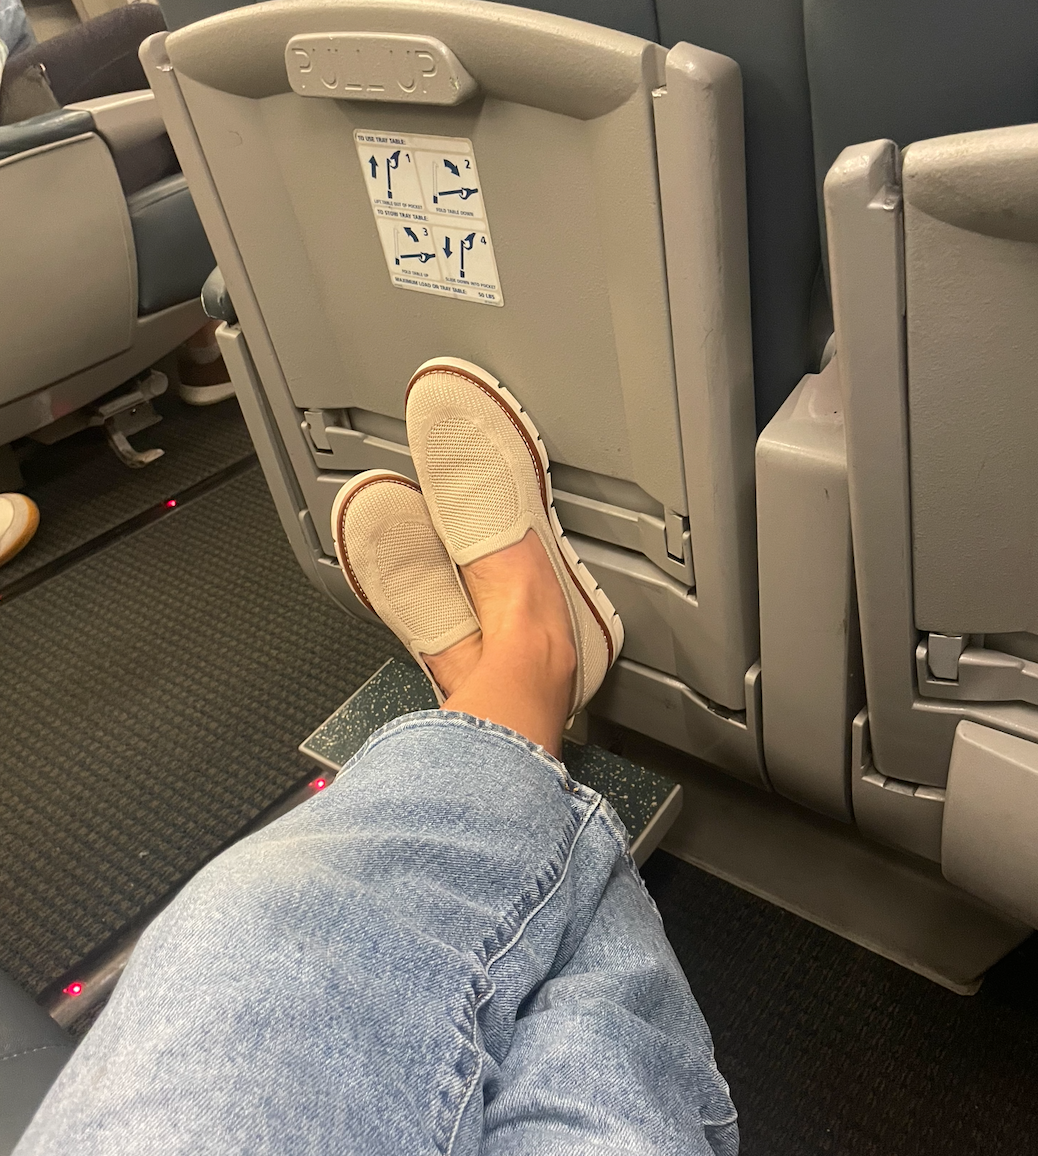 Image of feet wearing Easy Spirit loafers on a train